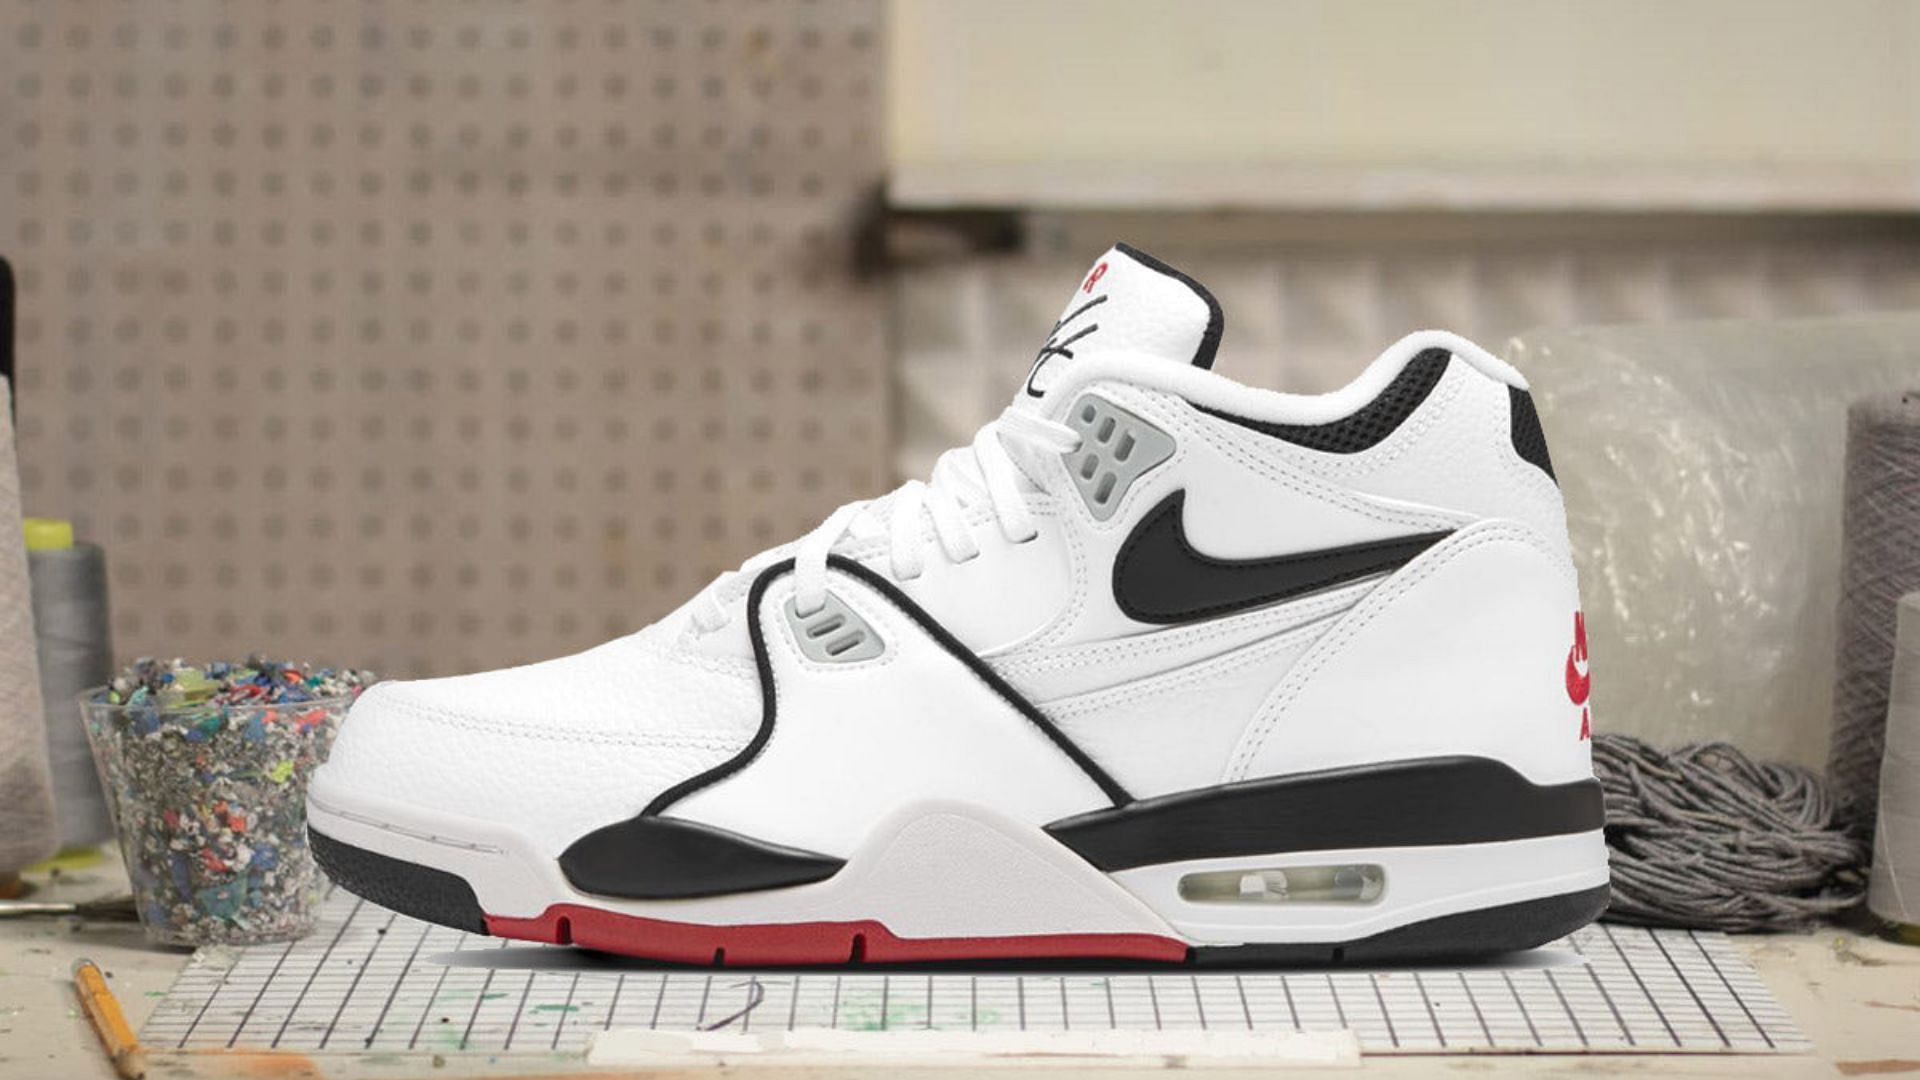 Where to Nike Air Flight Black and White shoes? Price more explored